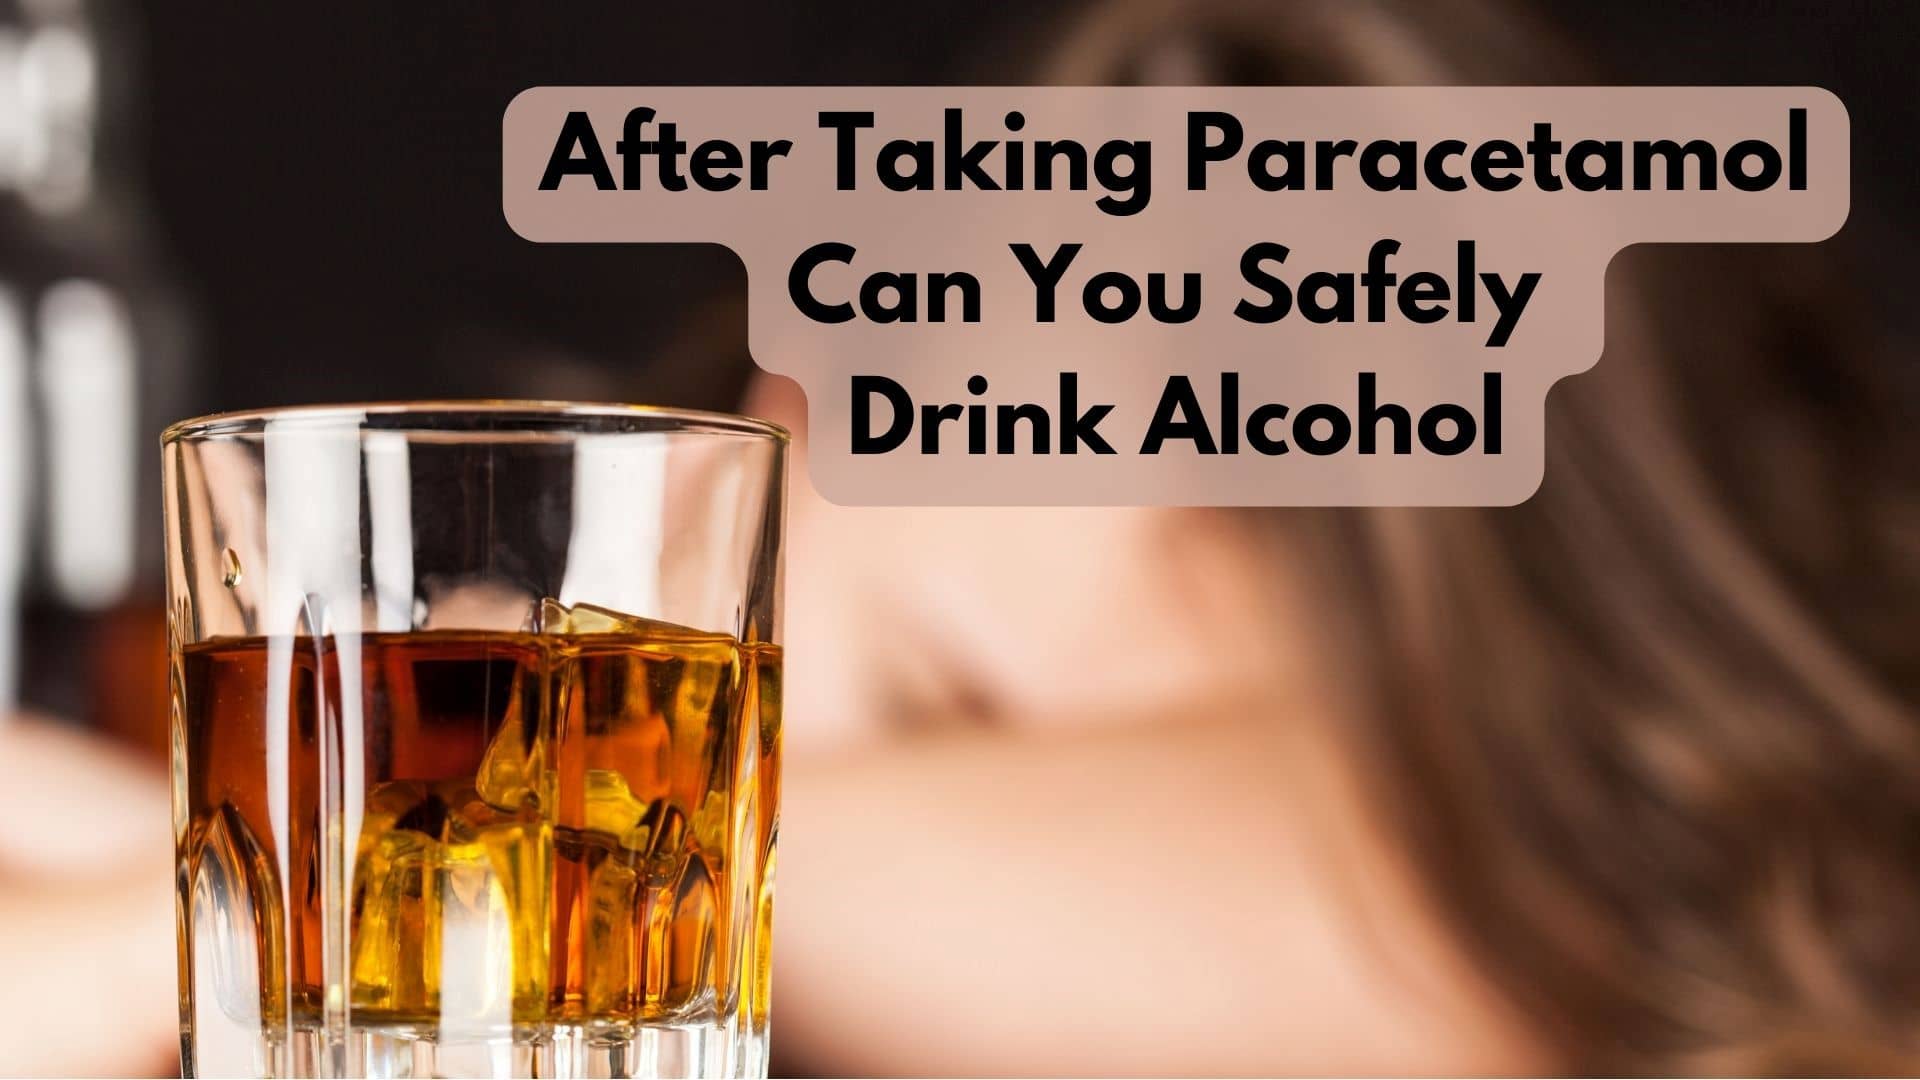 How Long After Taking Paracetamol Can You Safely Drink Alcohol